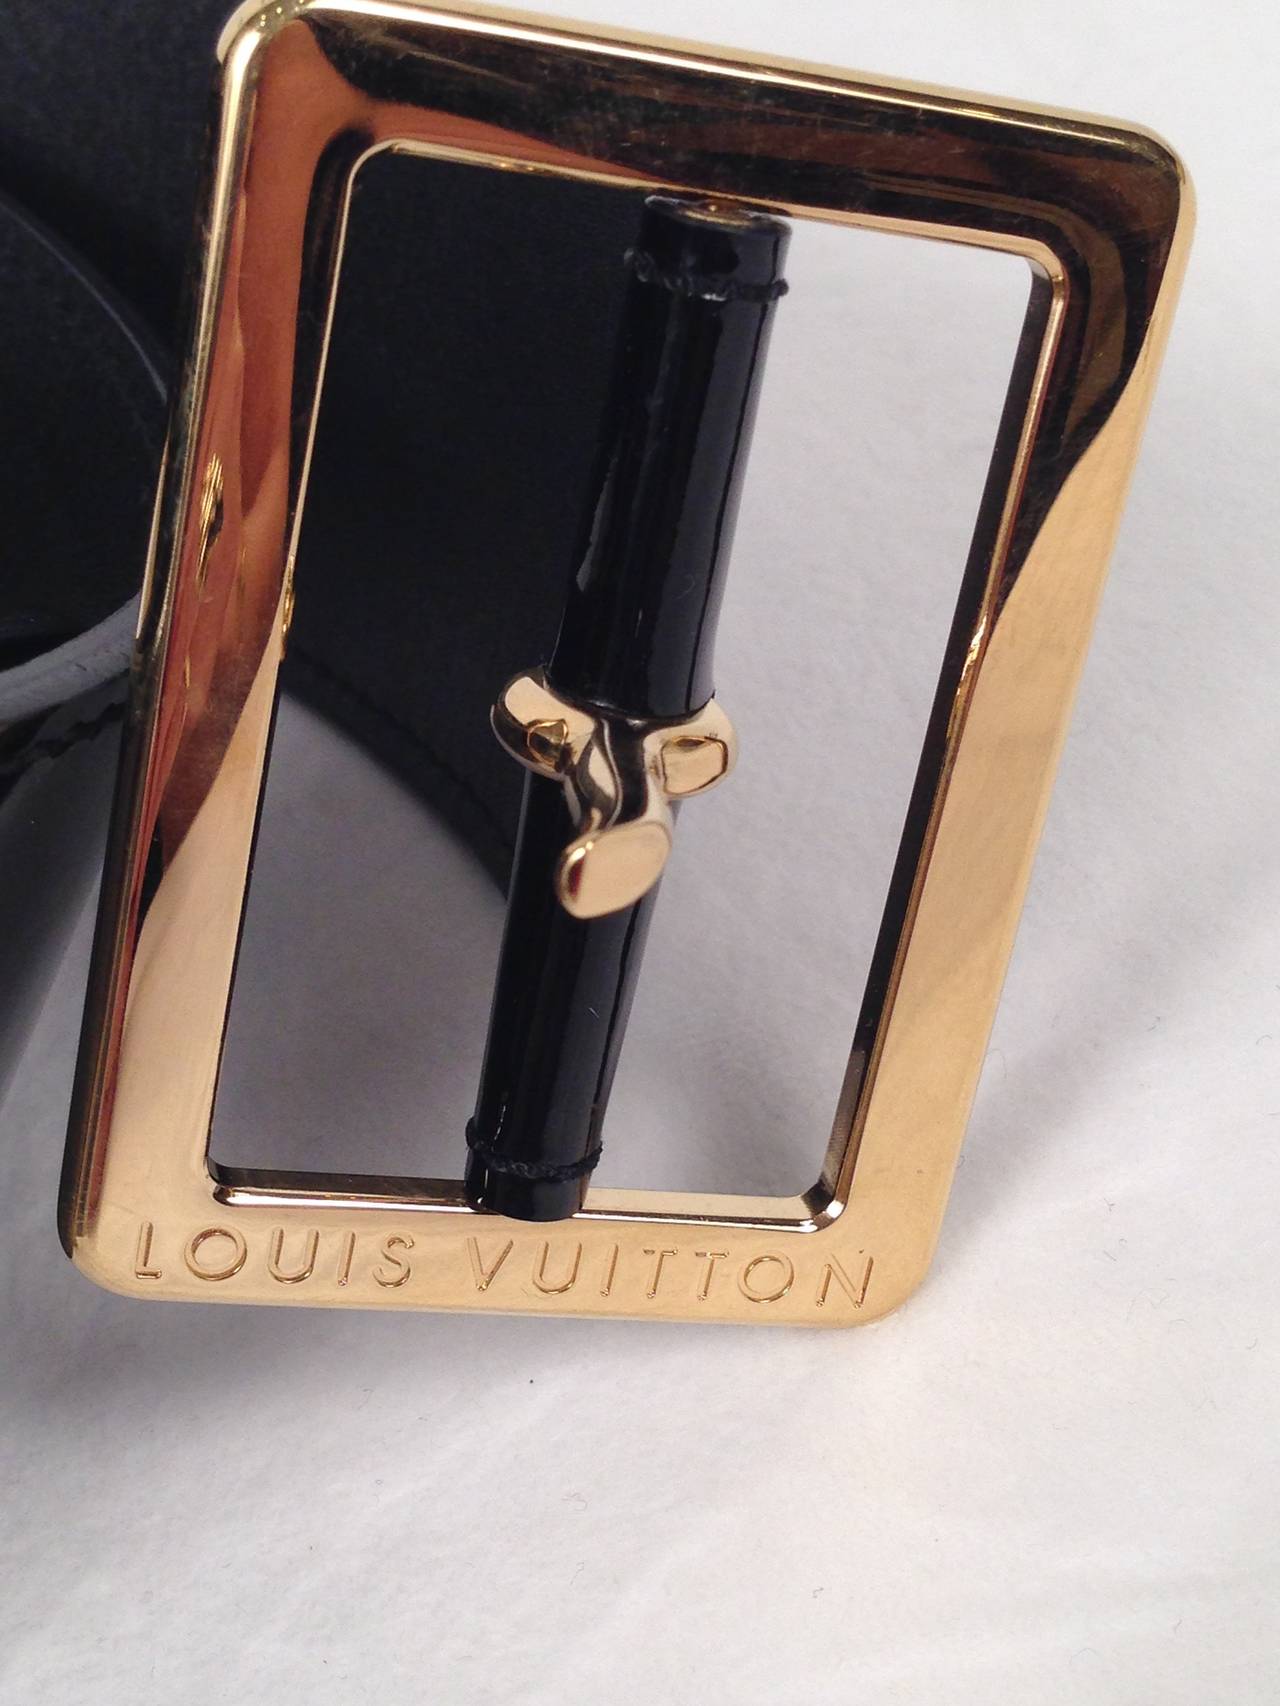 Louis Vuitton Black Patent Leather Belt For Sale at 1stdibs